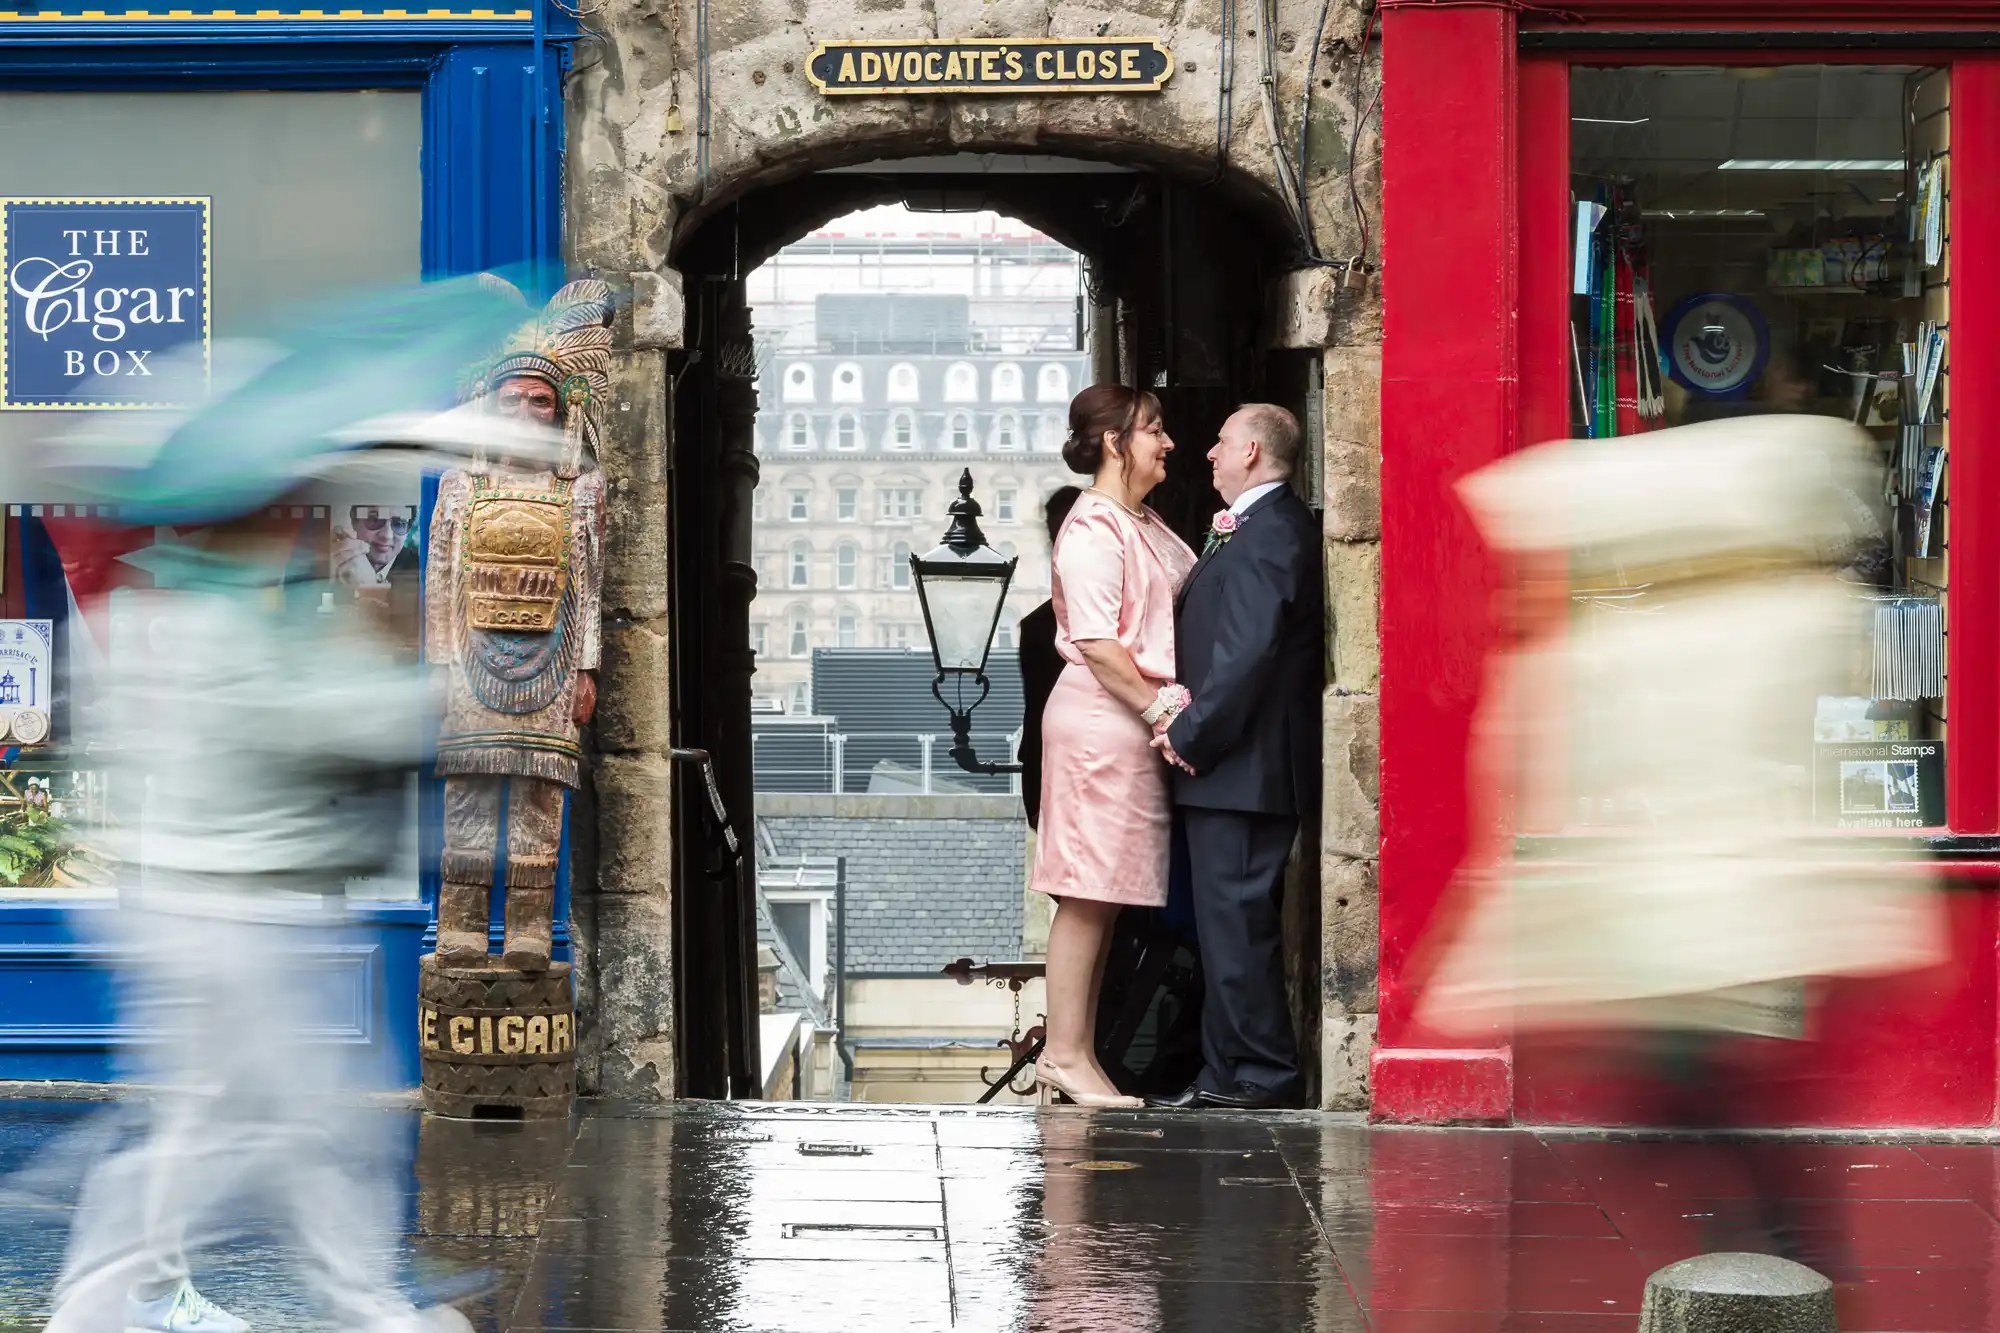 A couple in formal attire stands close together under the "Advocate's Close" sign between a blue shop and a red shop, with blurred pedestrians passing by in the foreground.